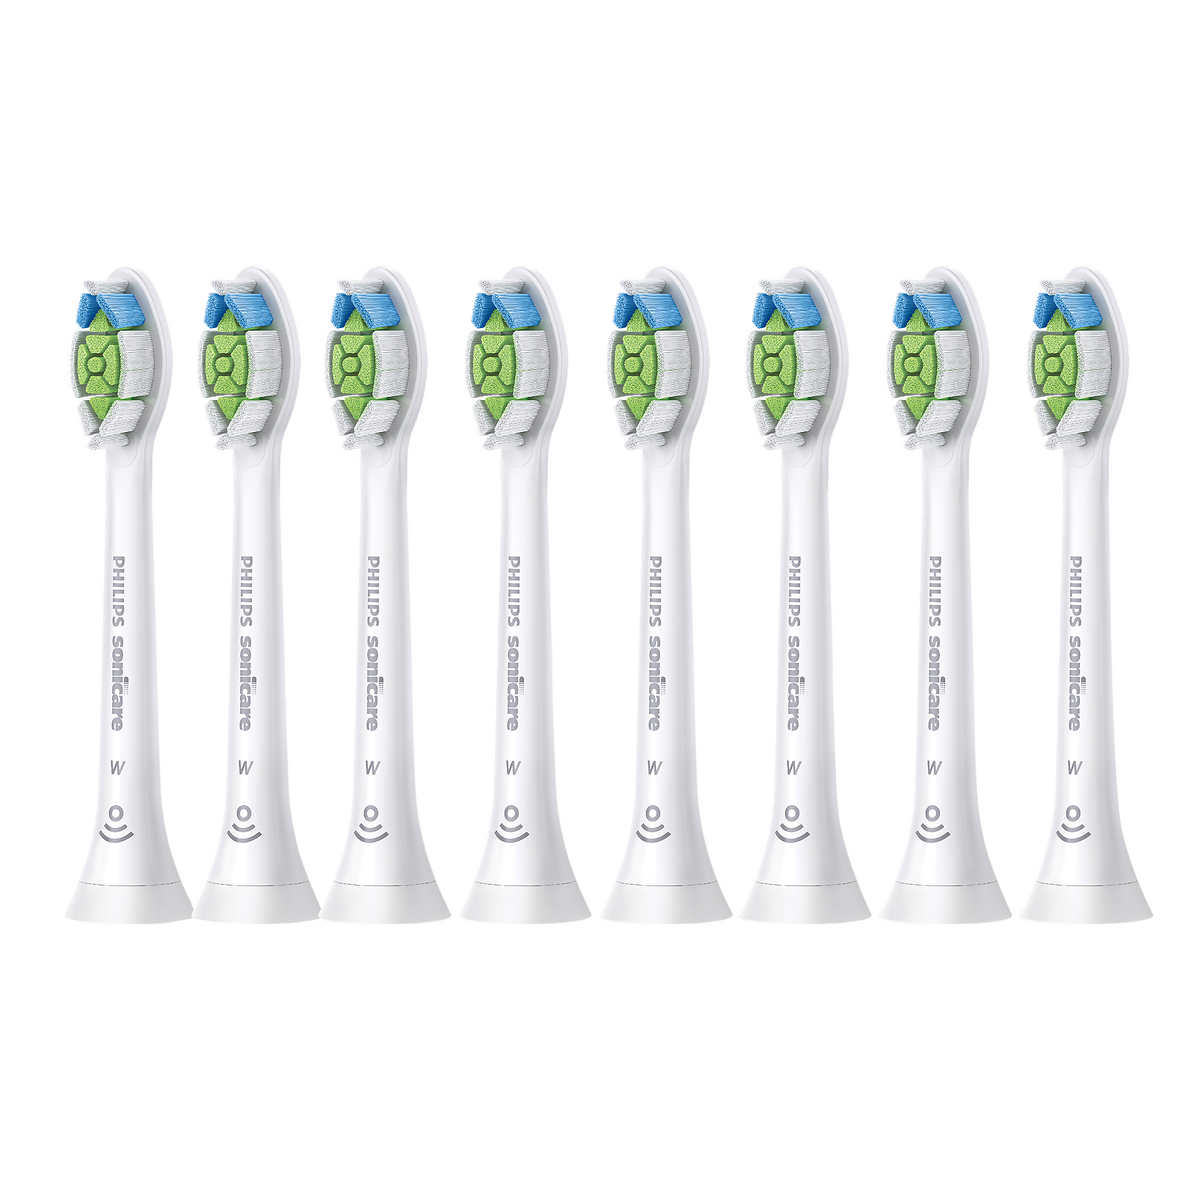 Freestanding Oral B Heads Philips Heads Stand Electric Toothbrush Head Holder 